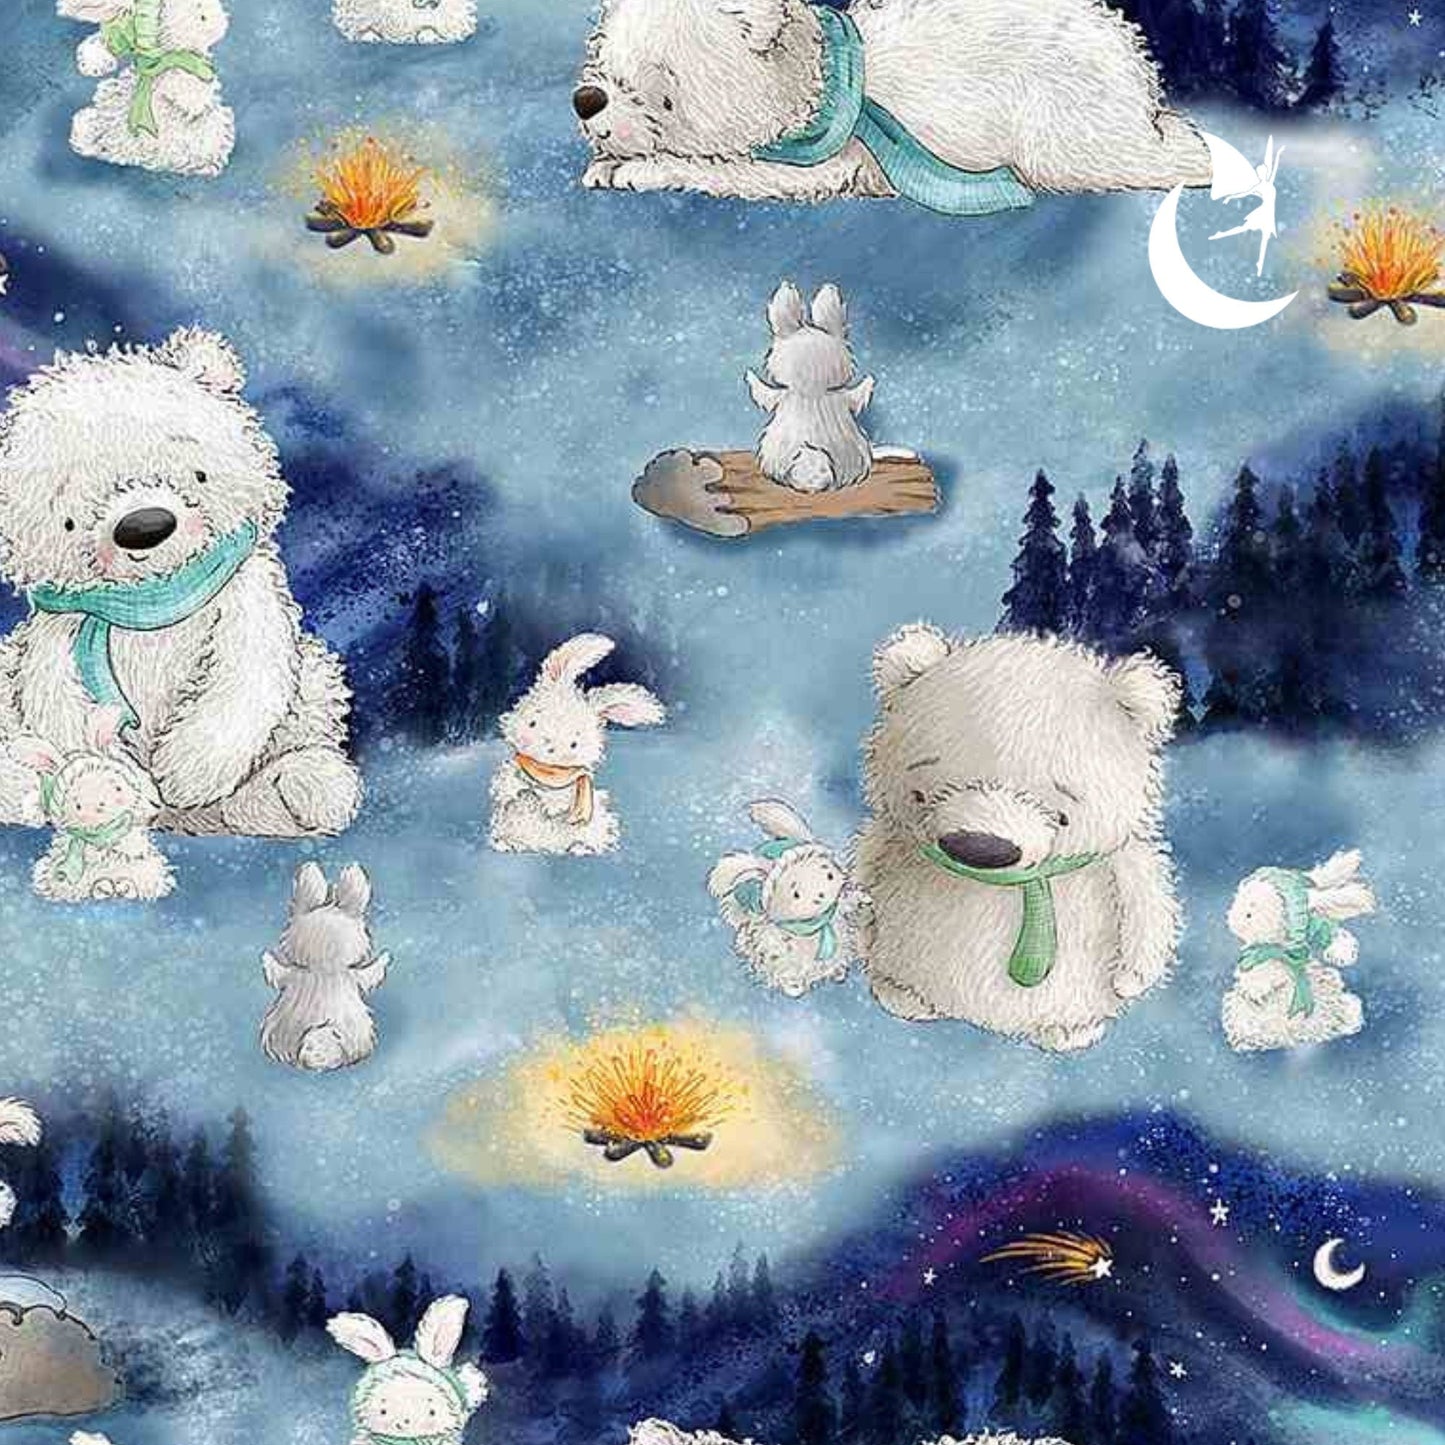 Angels Neverland Quilt Kit Arctic Nights Aurora Borealis Fabric with Bunnies